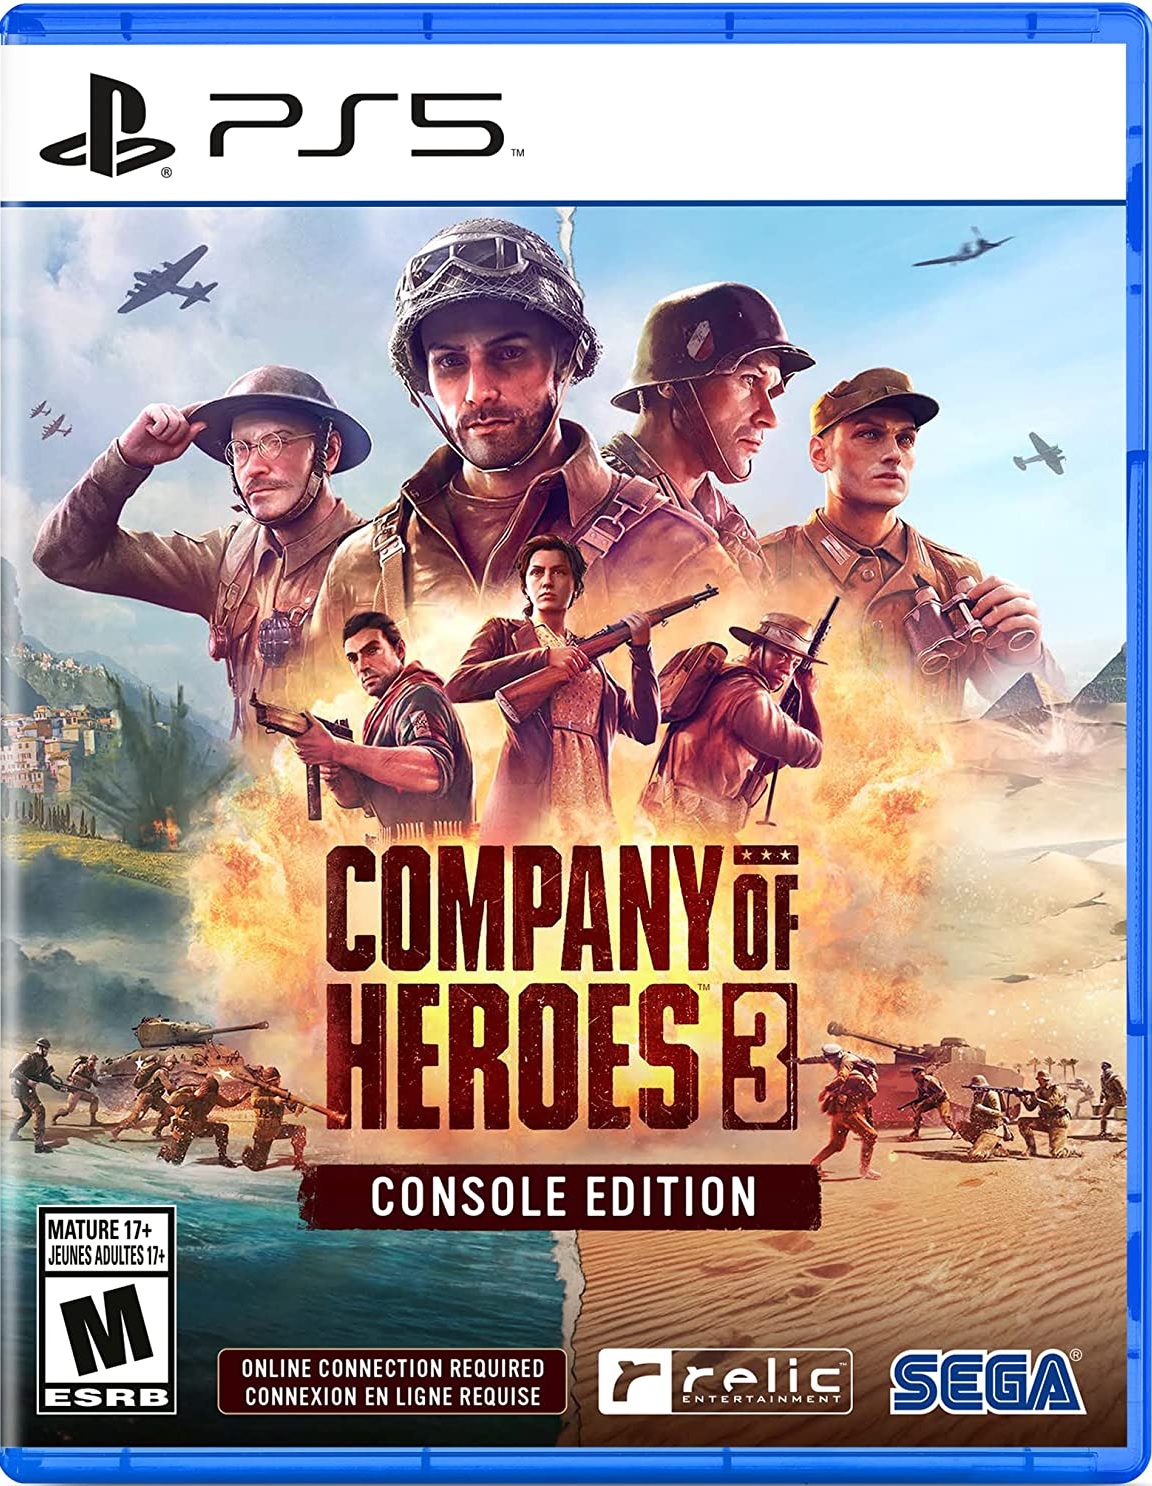 Company of Heroes 3 Console Launch Edition - PS5